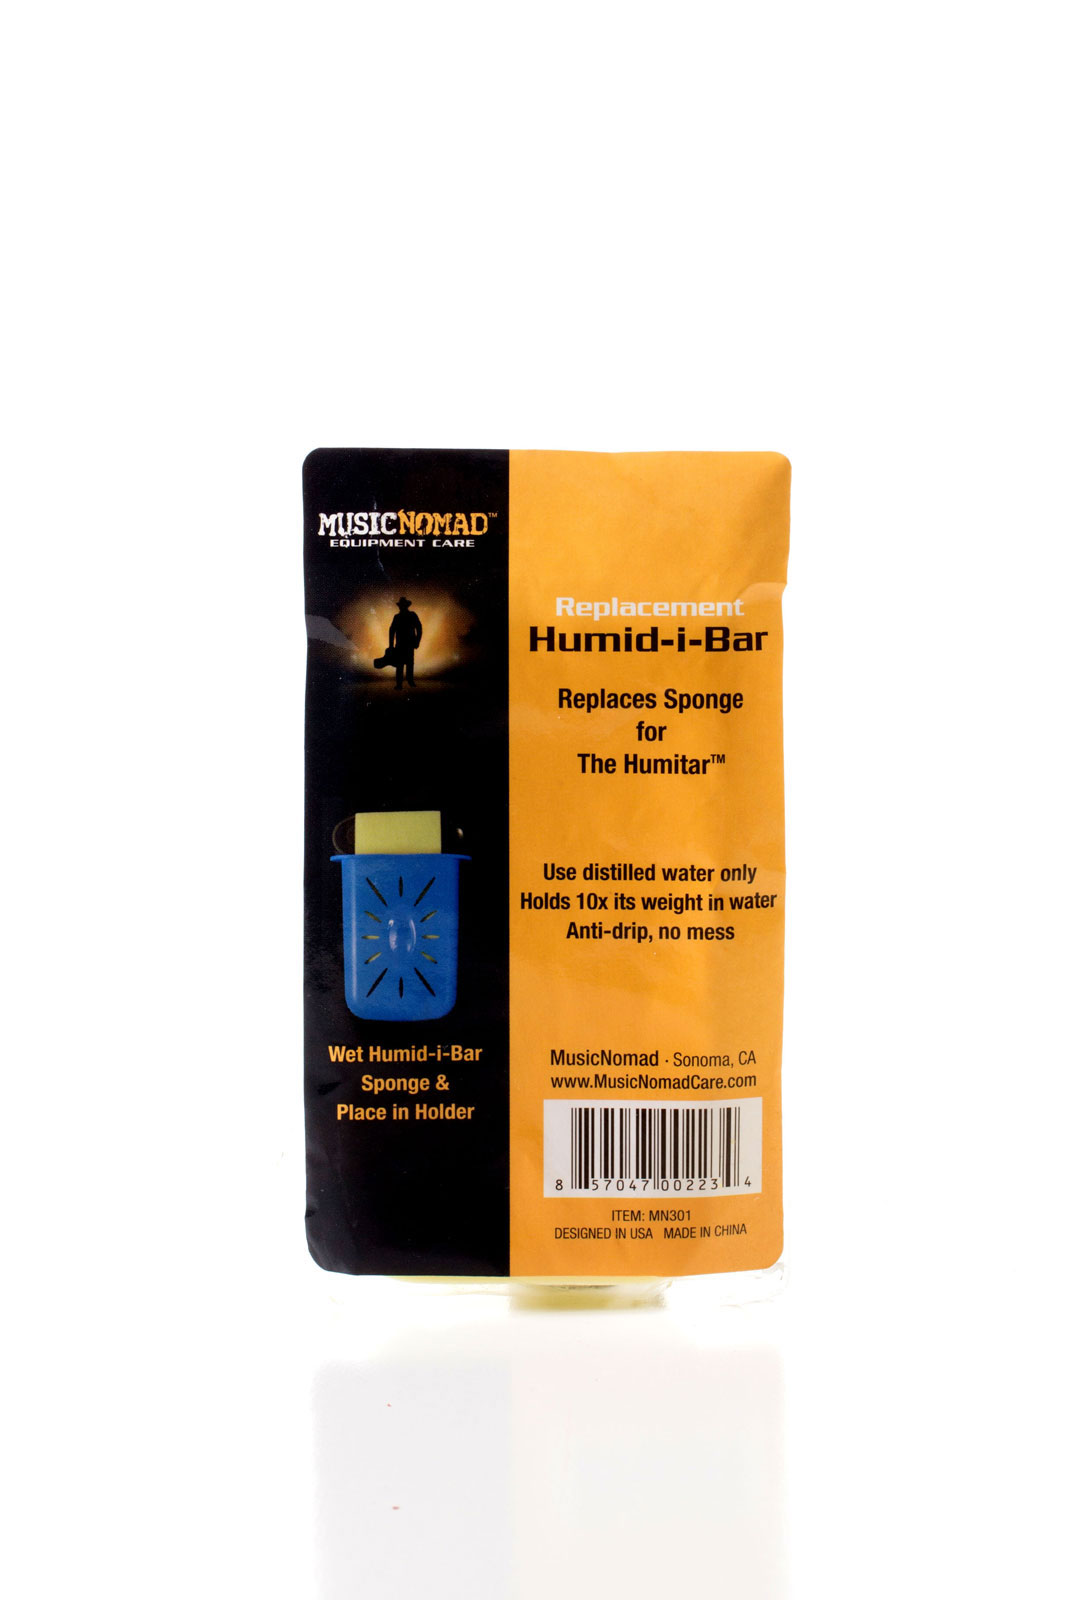 MUSICNOMAD MN301 HUMID-I-BAR EPONGE DE REMPLACEMENT POUR MN300